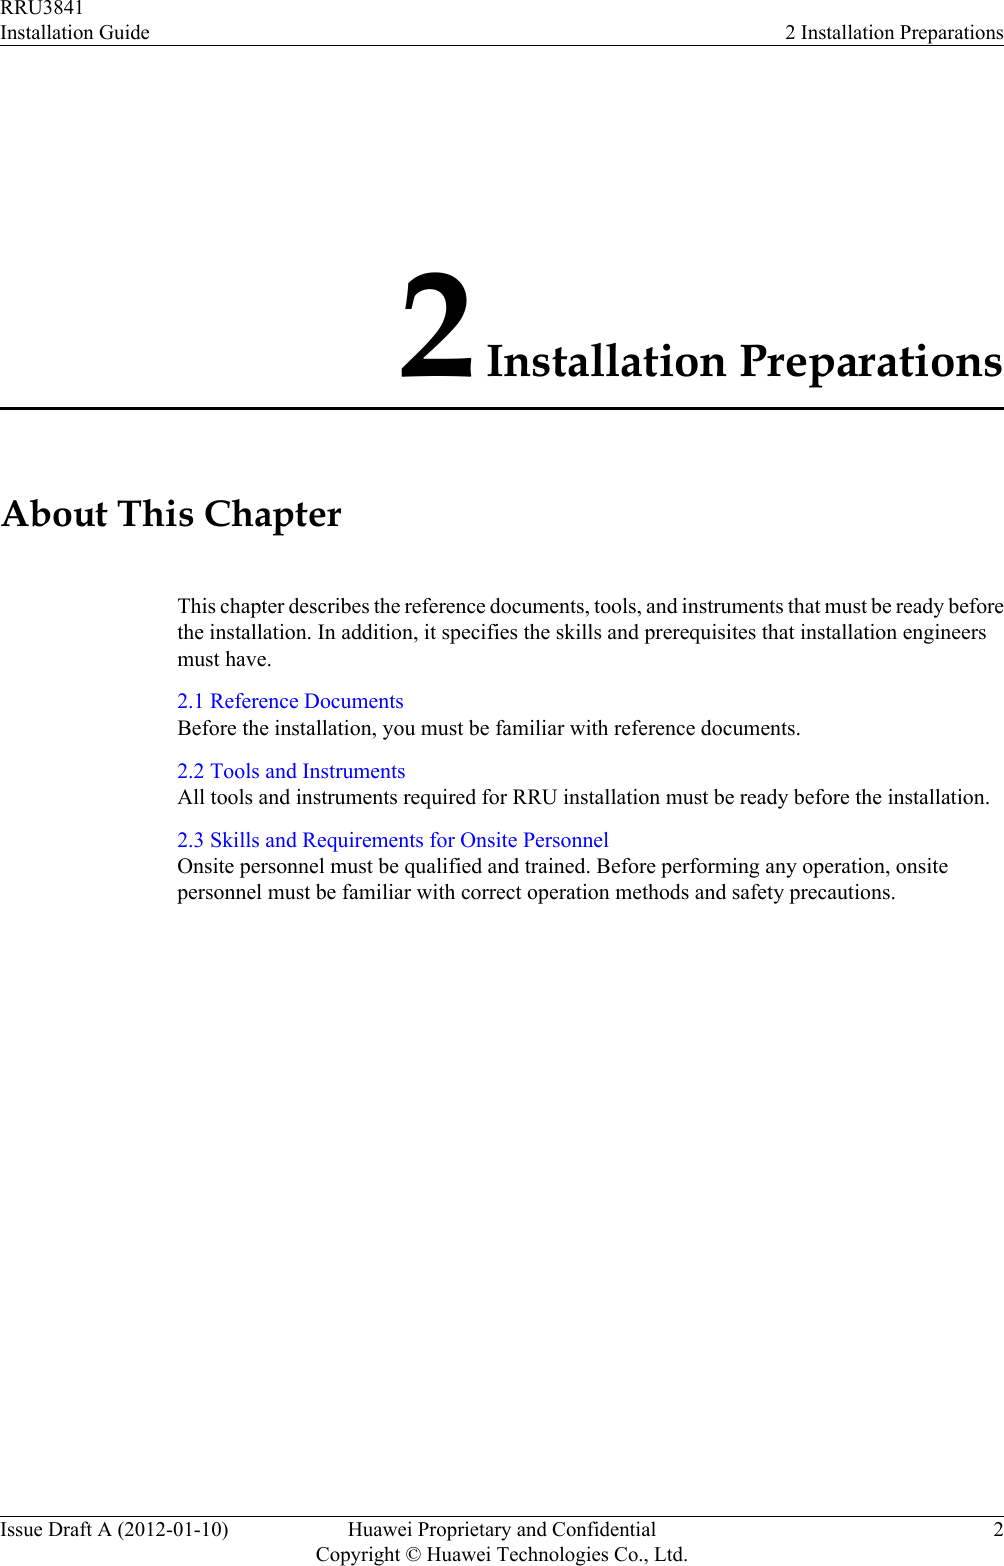 2 Installation PreparationsAbout This ChapterThis chapter describes the reference documents, tools, and instruments that must be ready beforethe installation. In addition, it specifies the skills and prerequisites that installation engineersmust have.2.1 Reference DocumentsBefore the installation, you must be familiar with reference documents.2.2 Tools and InstrumentsAll tools and instruments required for RRU installation must be ready before the installation.2.3 Skills and Requirements for Onsite PersonnelOnsite personnel must be qualified and trained. Before performing any operation, onsitepersonnel must be familiar with correct operation methods and safety precautions.RRU3841Installation Guide 2 Installation PreparationsIssue Draft A (2012-01-10) Huawei Proprietary and ConfidentialCopyright © Huawei Technologies Co., Ltd.2